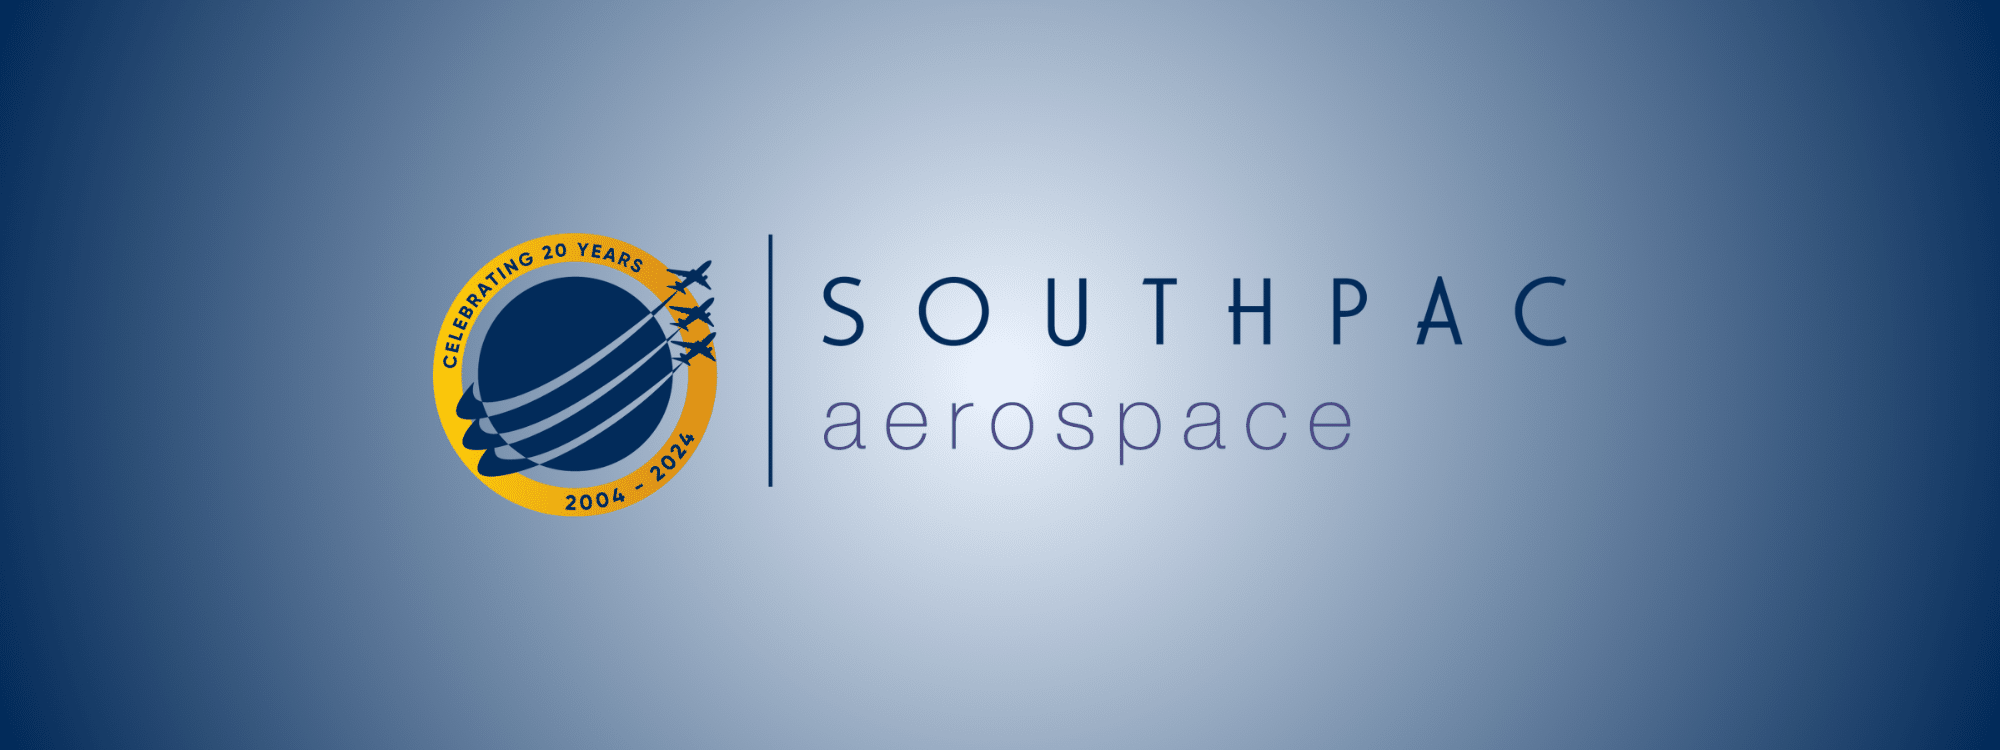 Southpac Aerospace is proudly celebrating 20 years in business, serving the aviation industry across the Asia-Pacific.